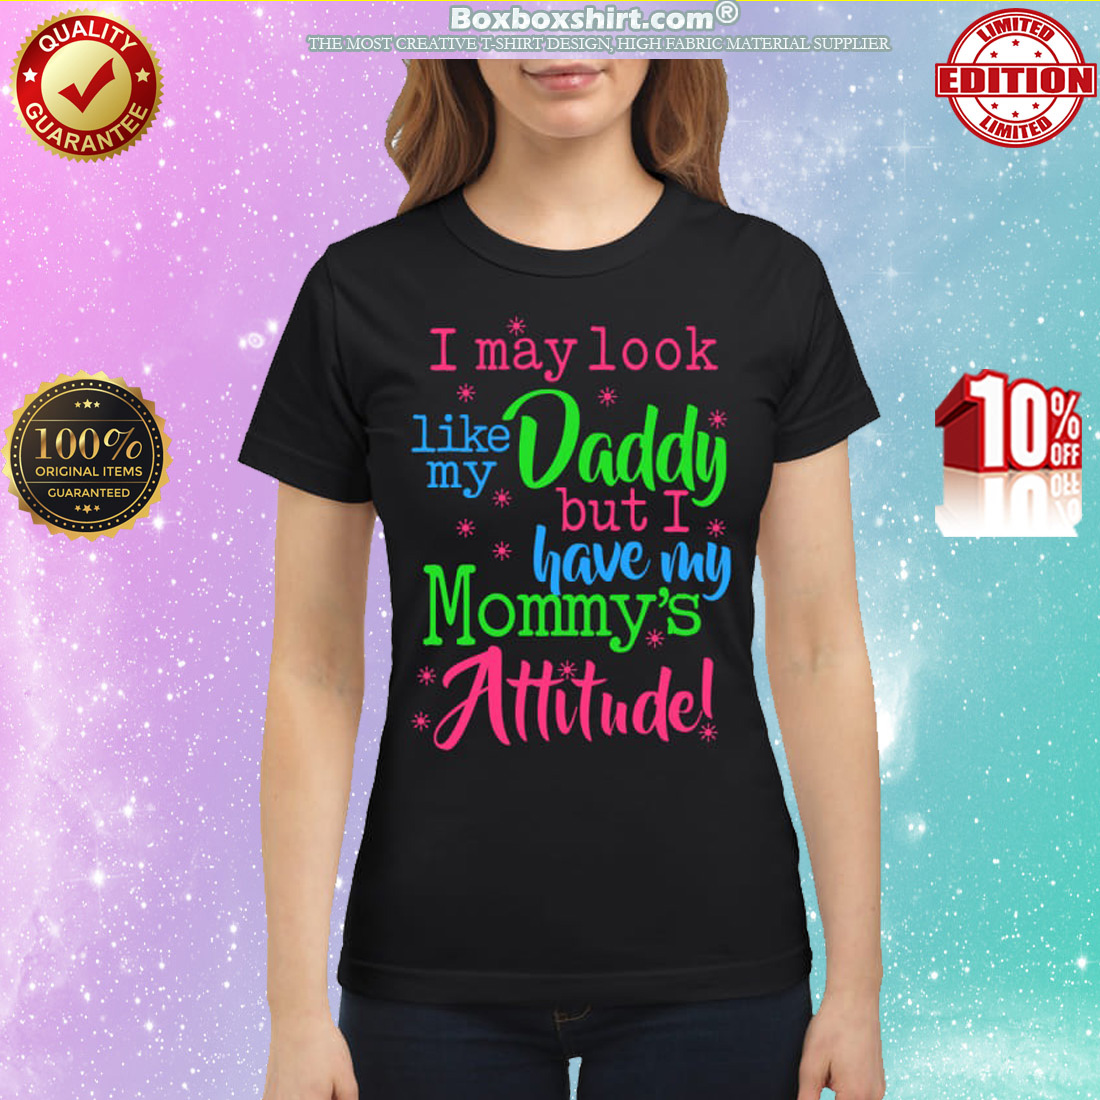 I may look like my daddy but I have my mommy's attitude shirt